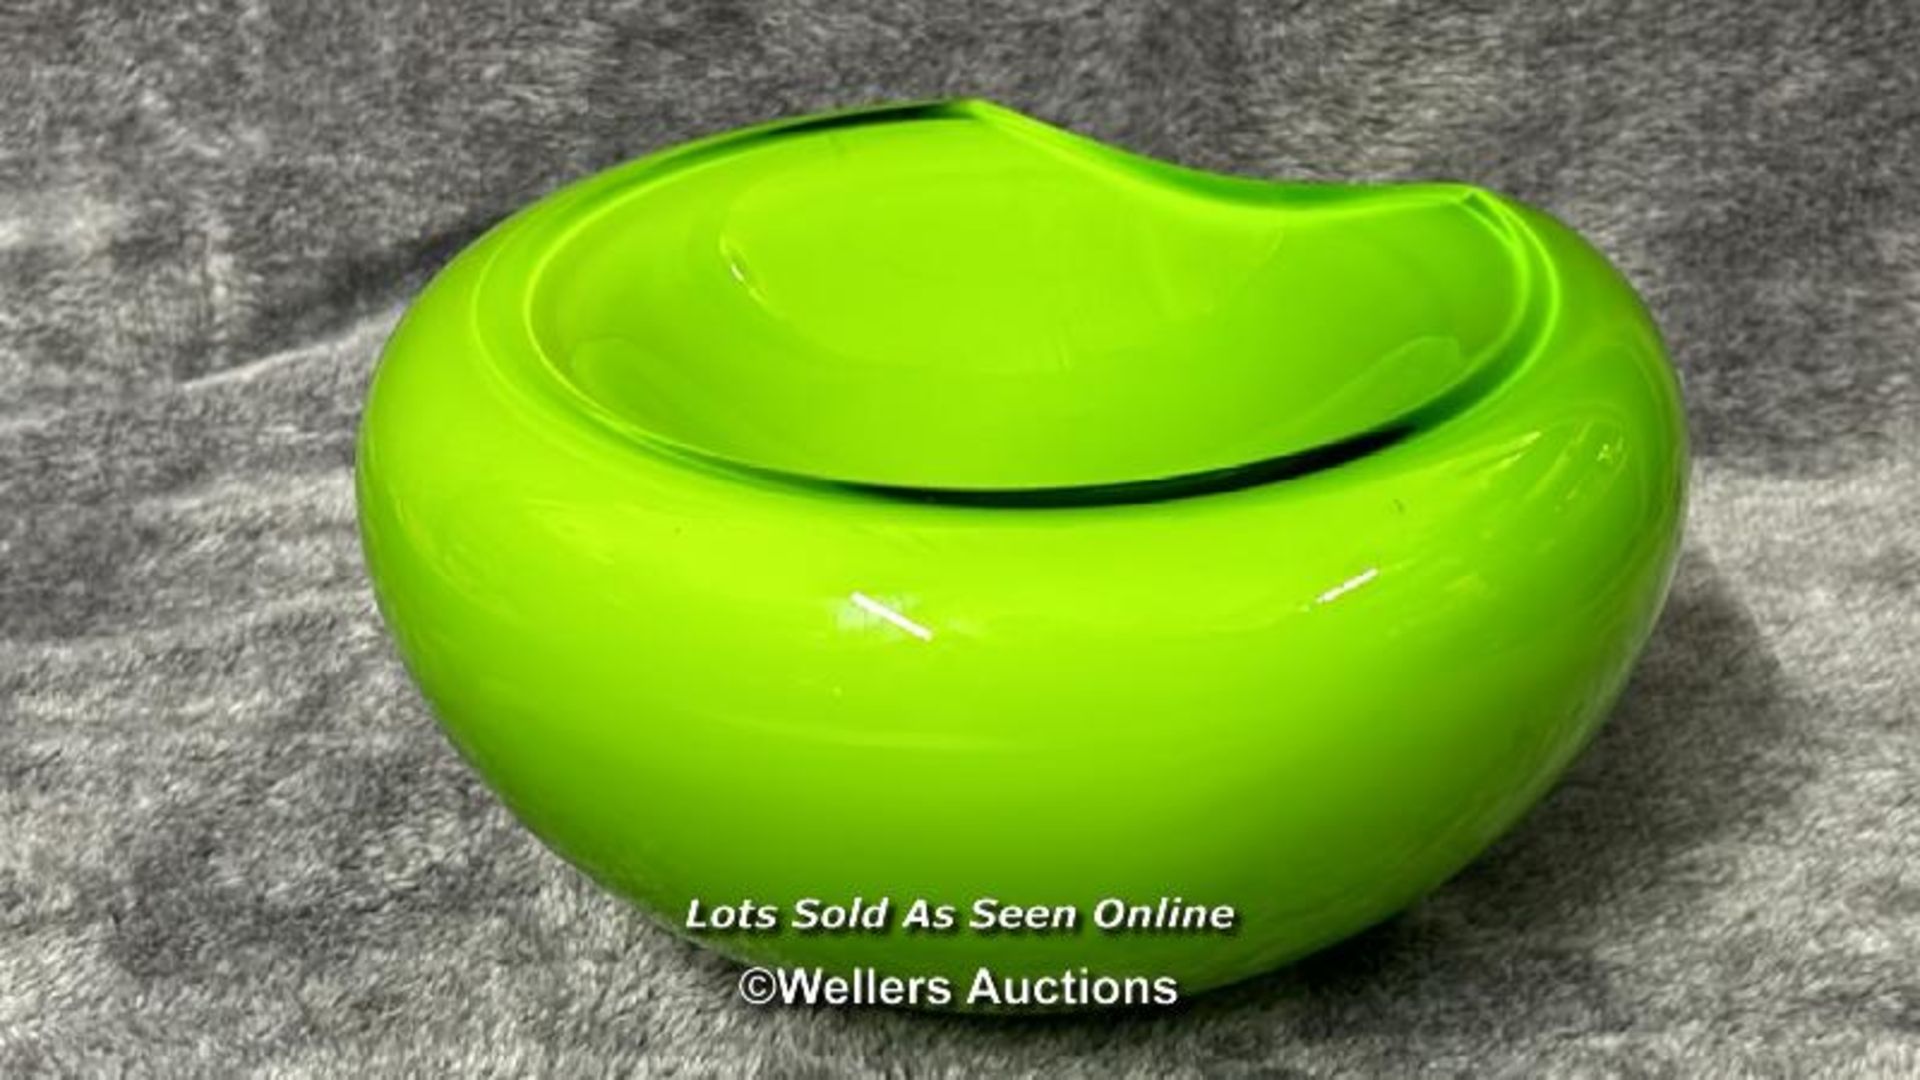 Danish contemporary Eva Solo 'Smiley' glass bowl by Tools, green and milk glass, 20cm diameter, 10. - Image 2 of 4